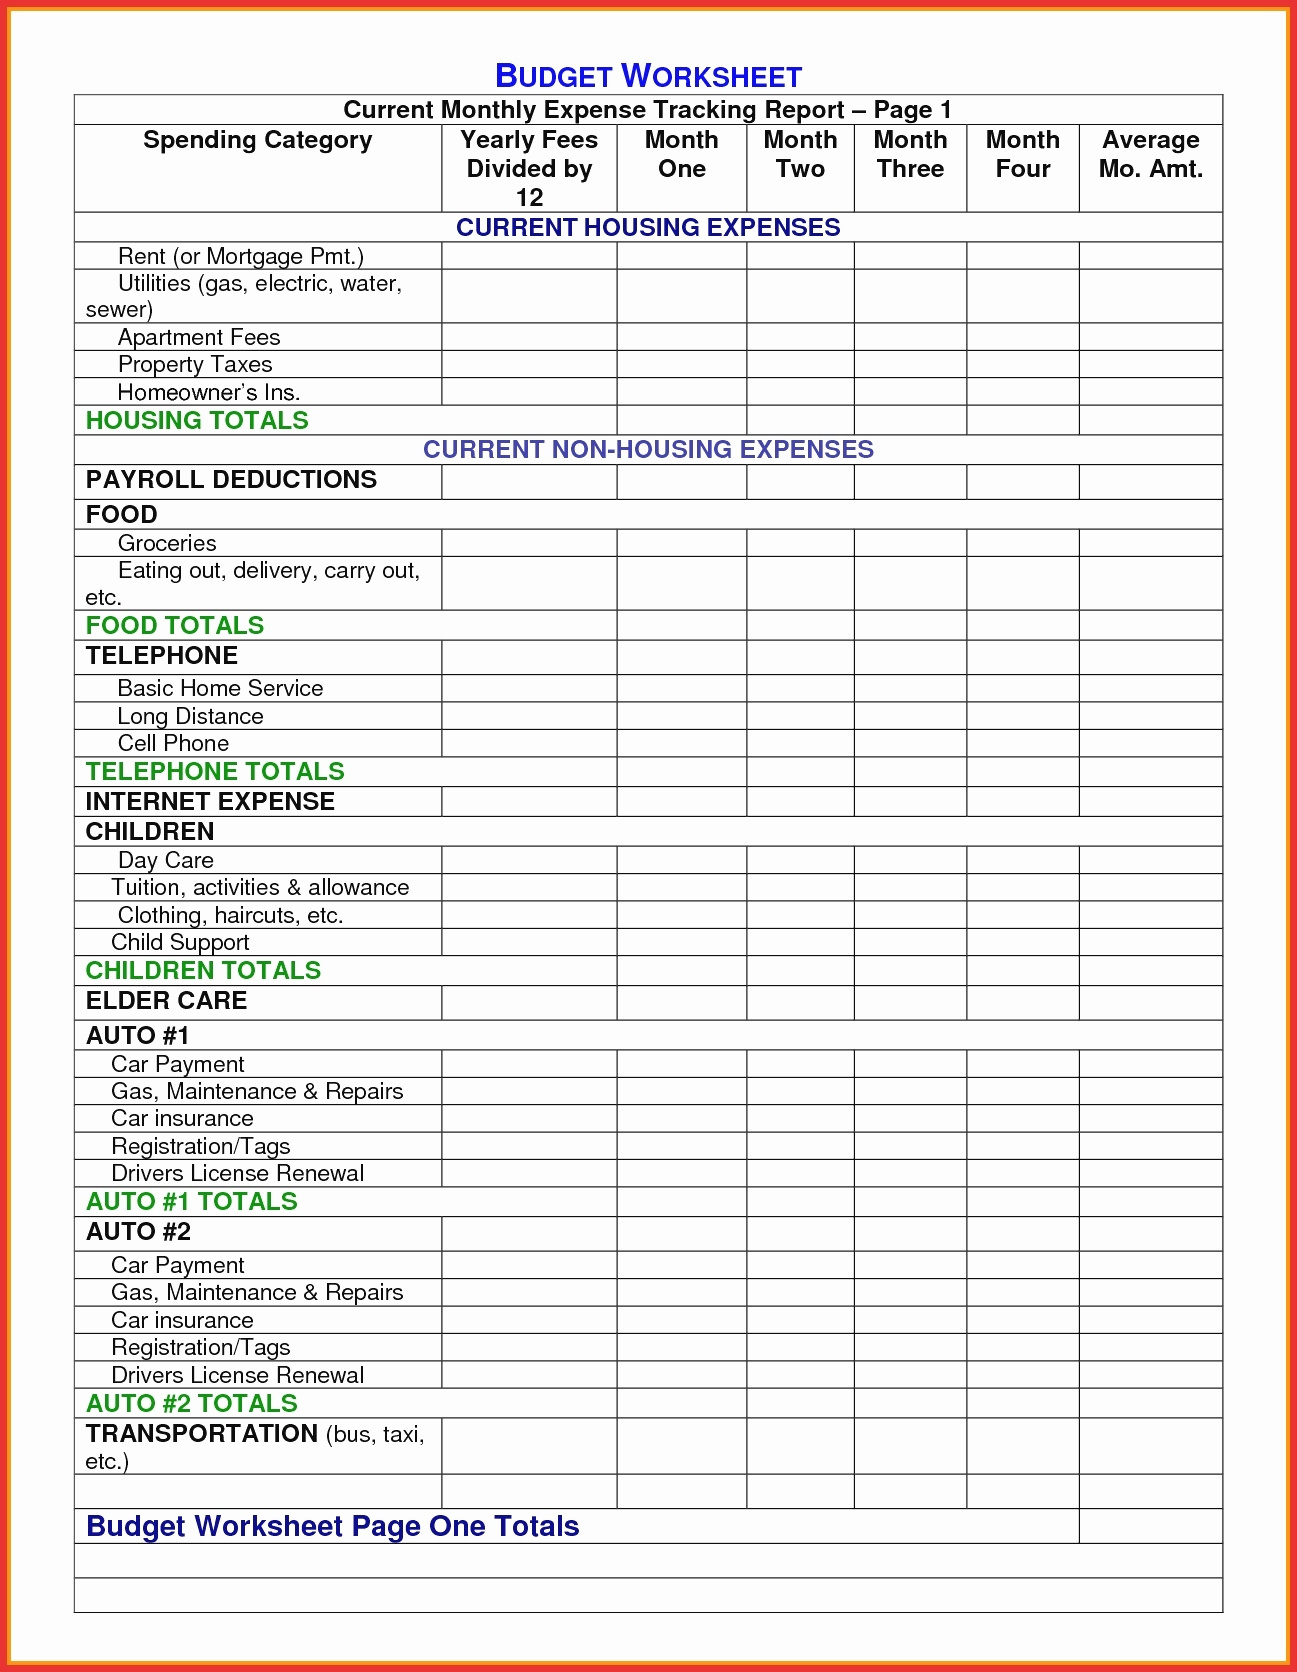 Rental Property Expenses Spreadsheet With Regard To Rental Property Income And Expense Spreadsheet  Spreadsheet Collections